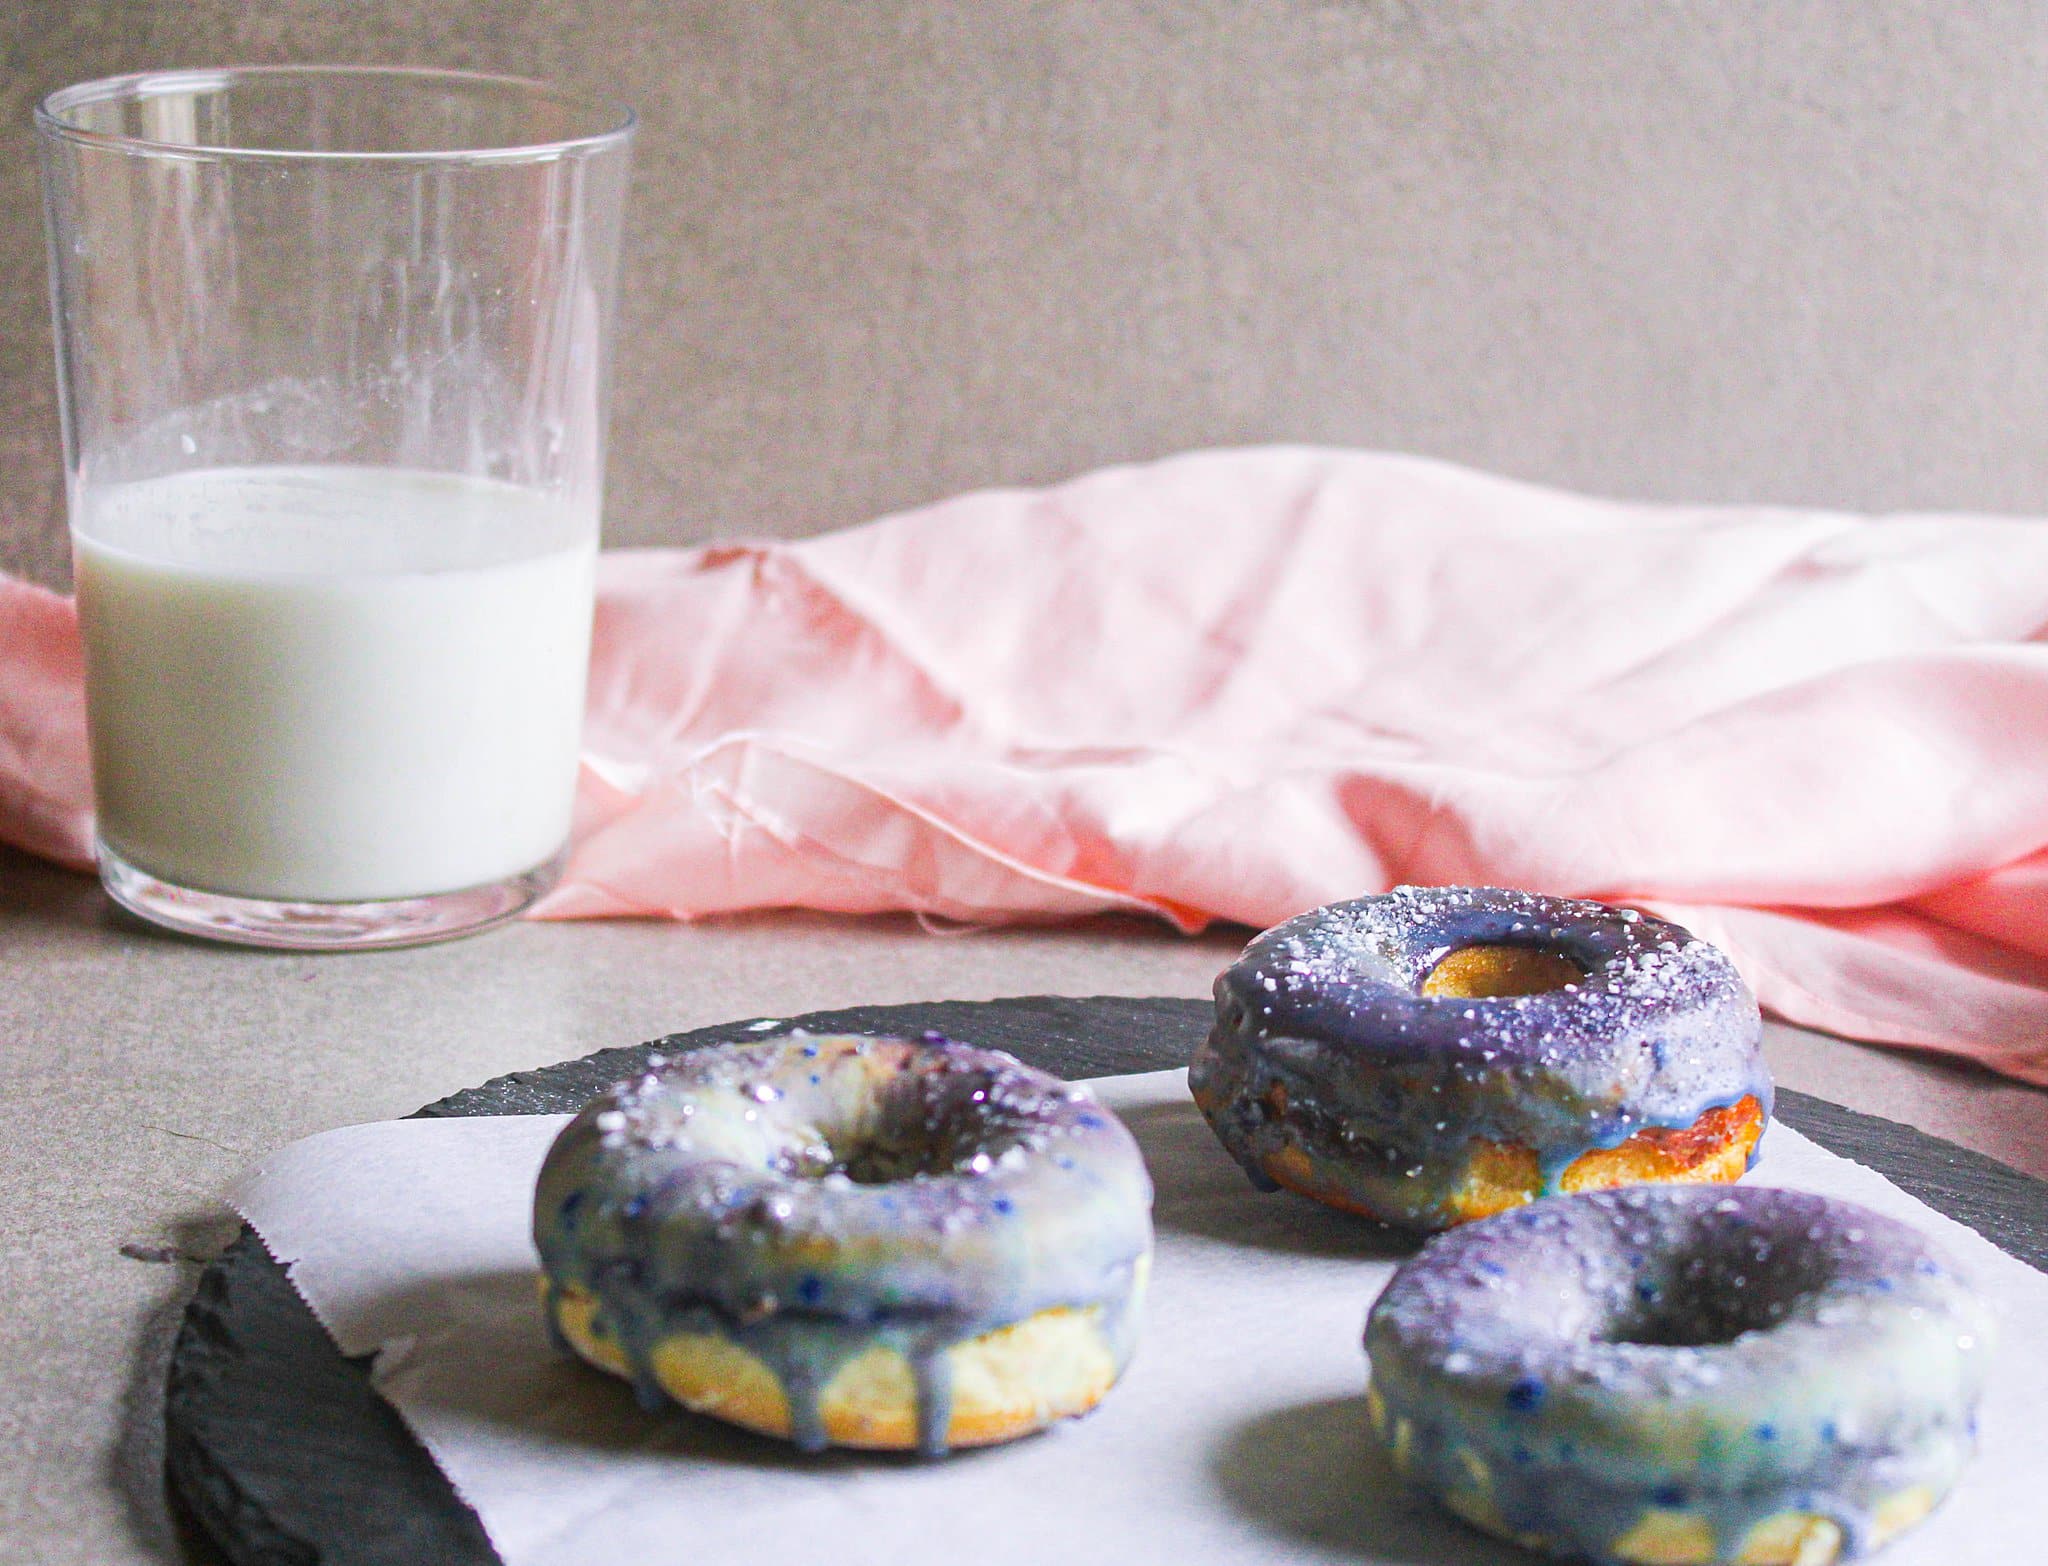 How to Make Galaxy Donuts